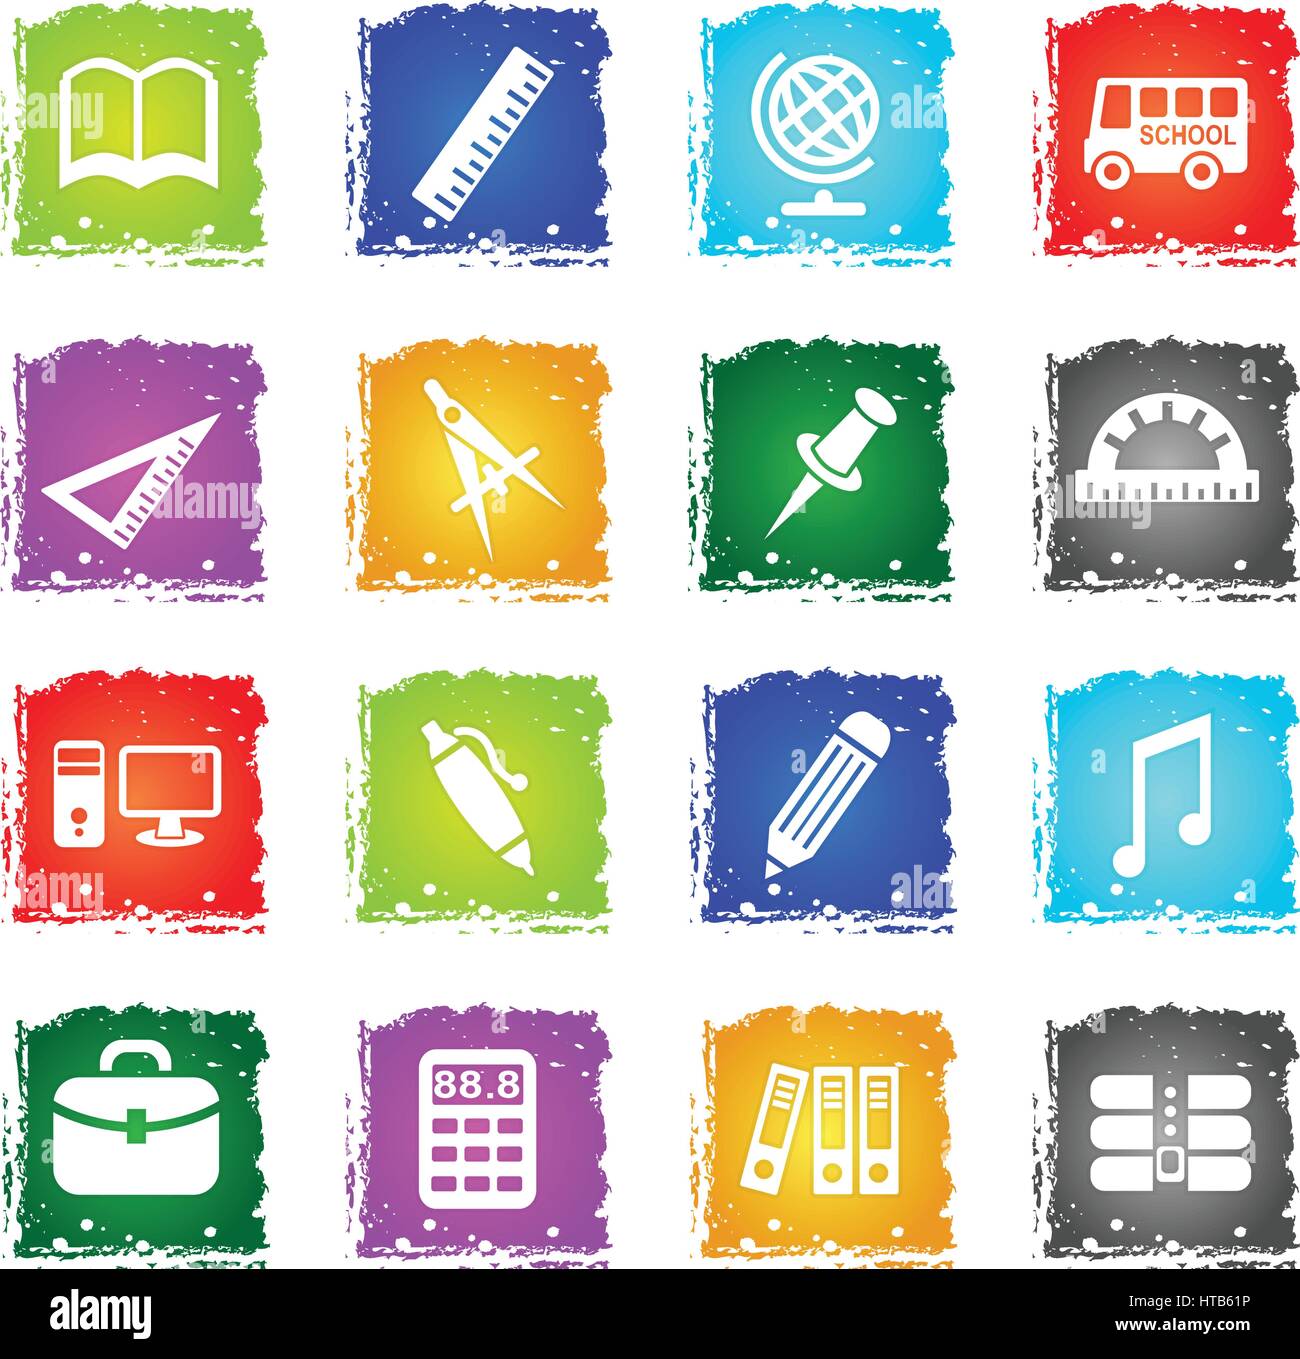 school web icons in grunge style for user interface design Stock Vector